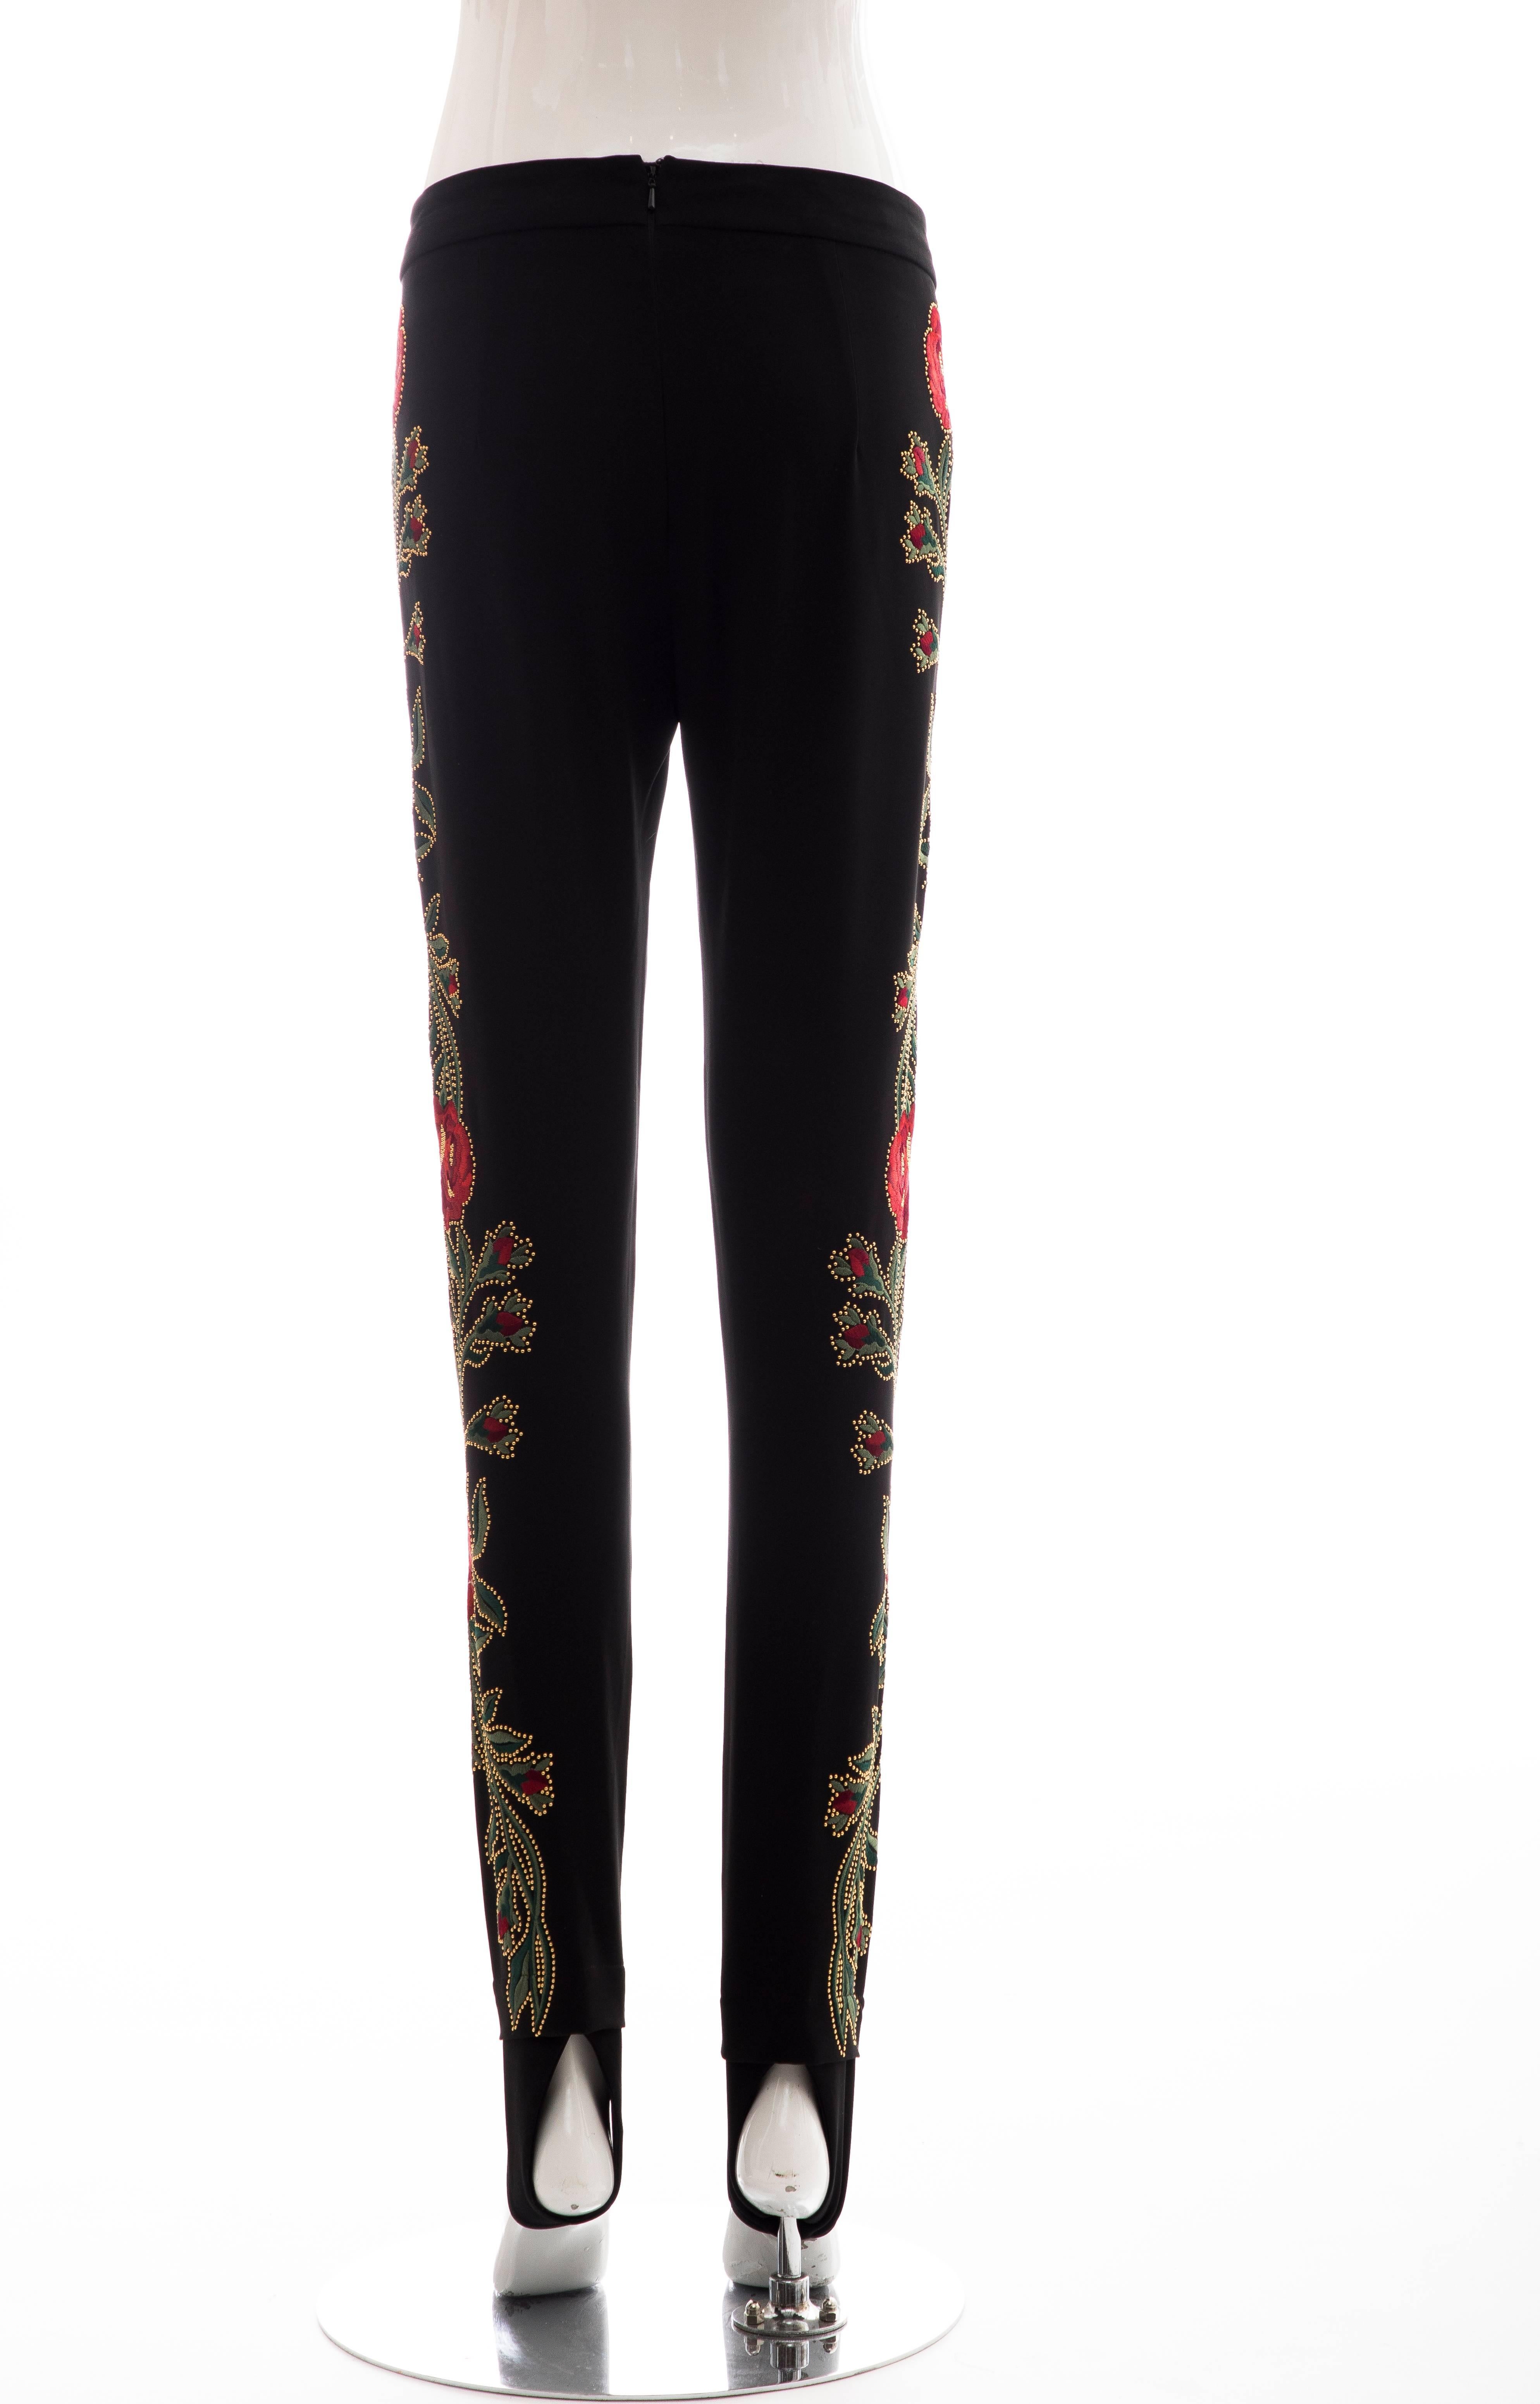 Moschino Runway Black Floral Embroidered & Gold Studded Pants, Fall 2013 For Sale 2